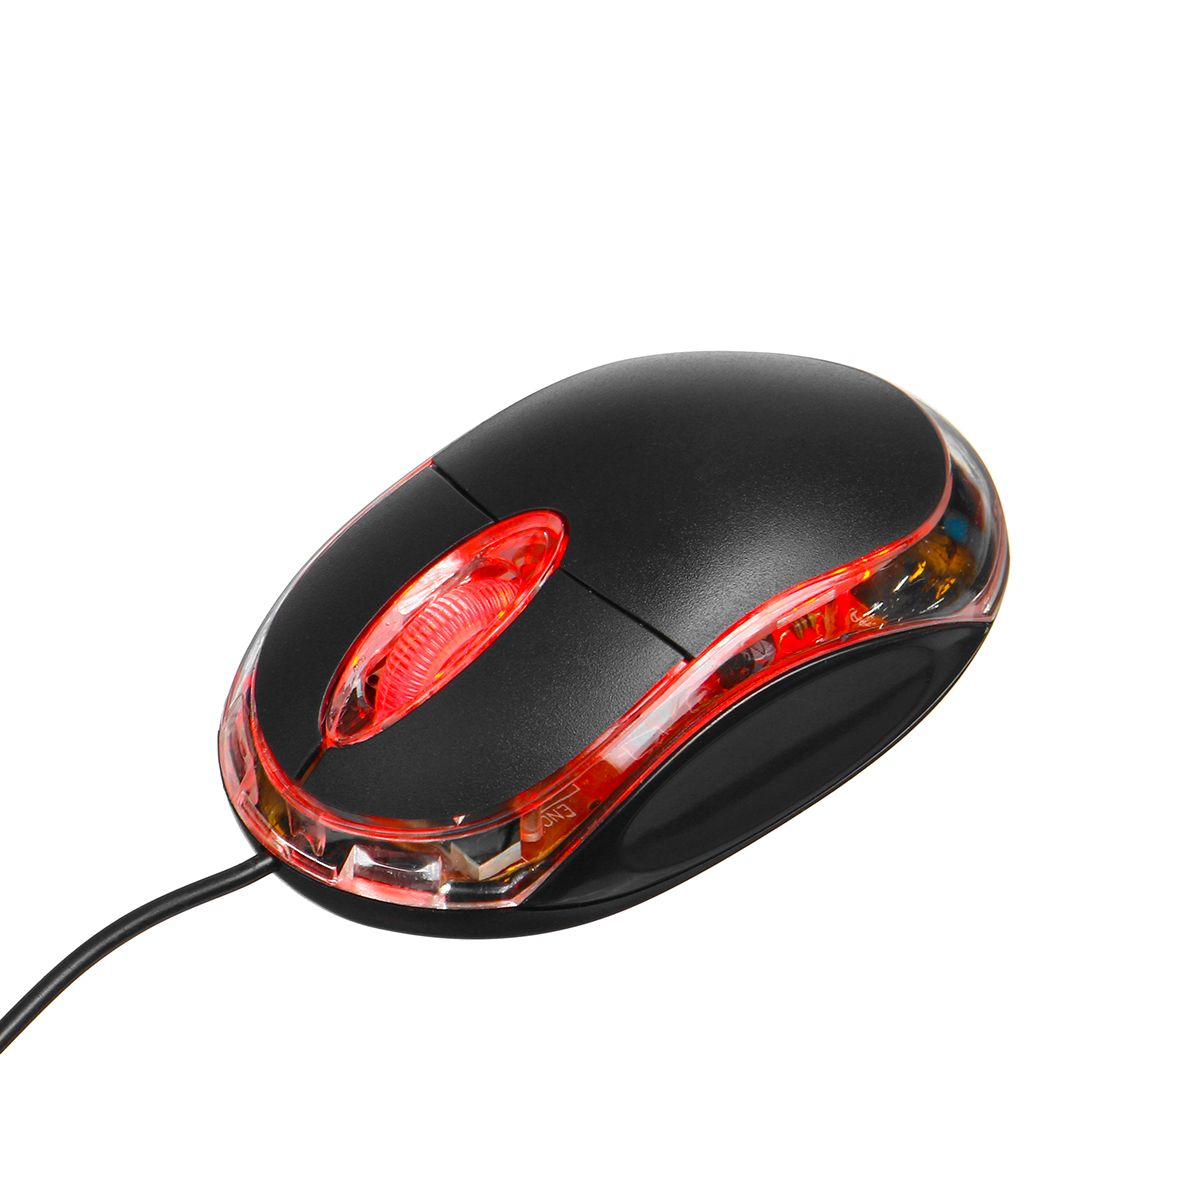 1200-DPI-Mini-USB-Wired-LED-Optical-Mouse-for-Laptop-Cmputer-PC-1654496